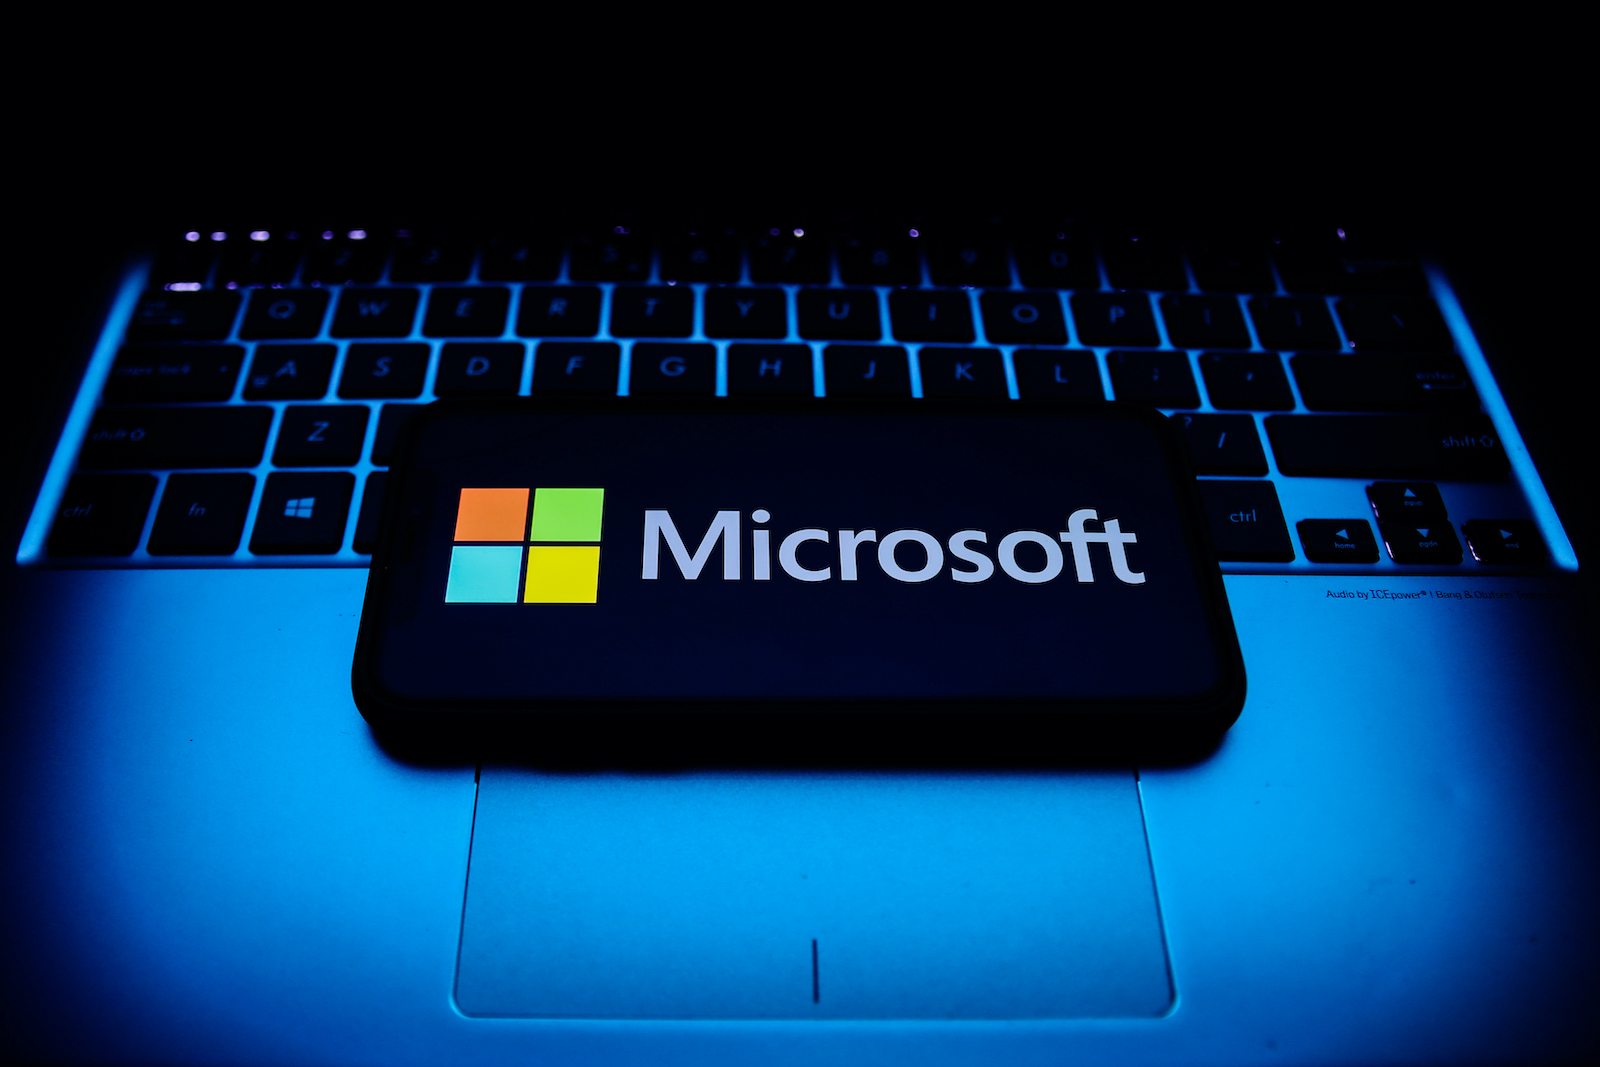 Microsoft logo displayed on a phone screen and a laptop keyboard are seen in this illustration photo taken in Krakow, Poland on October 30, 2021. (Photo by Jakub Porzycki/NurPhoto via Getty Images)